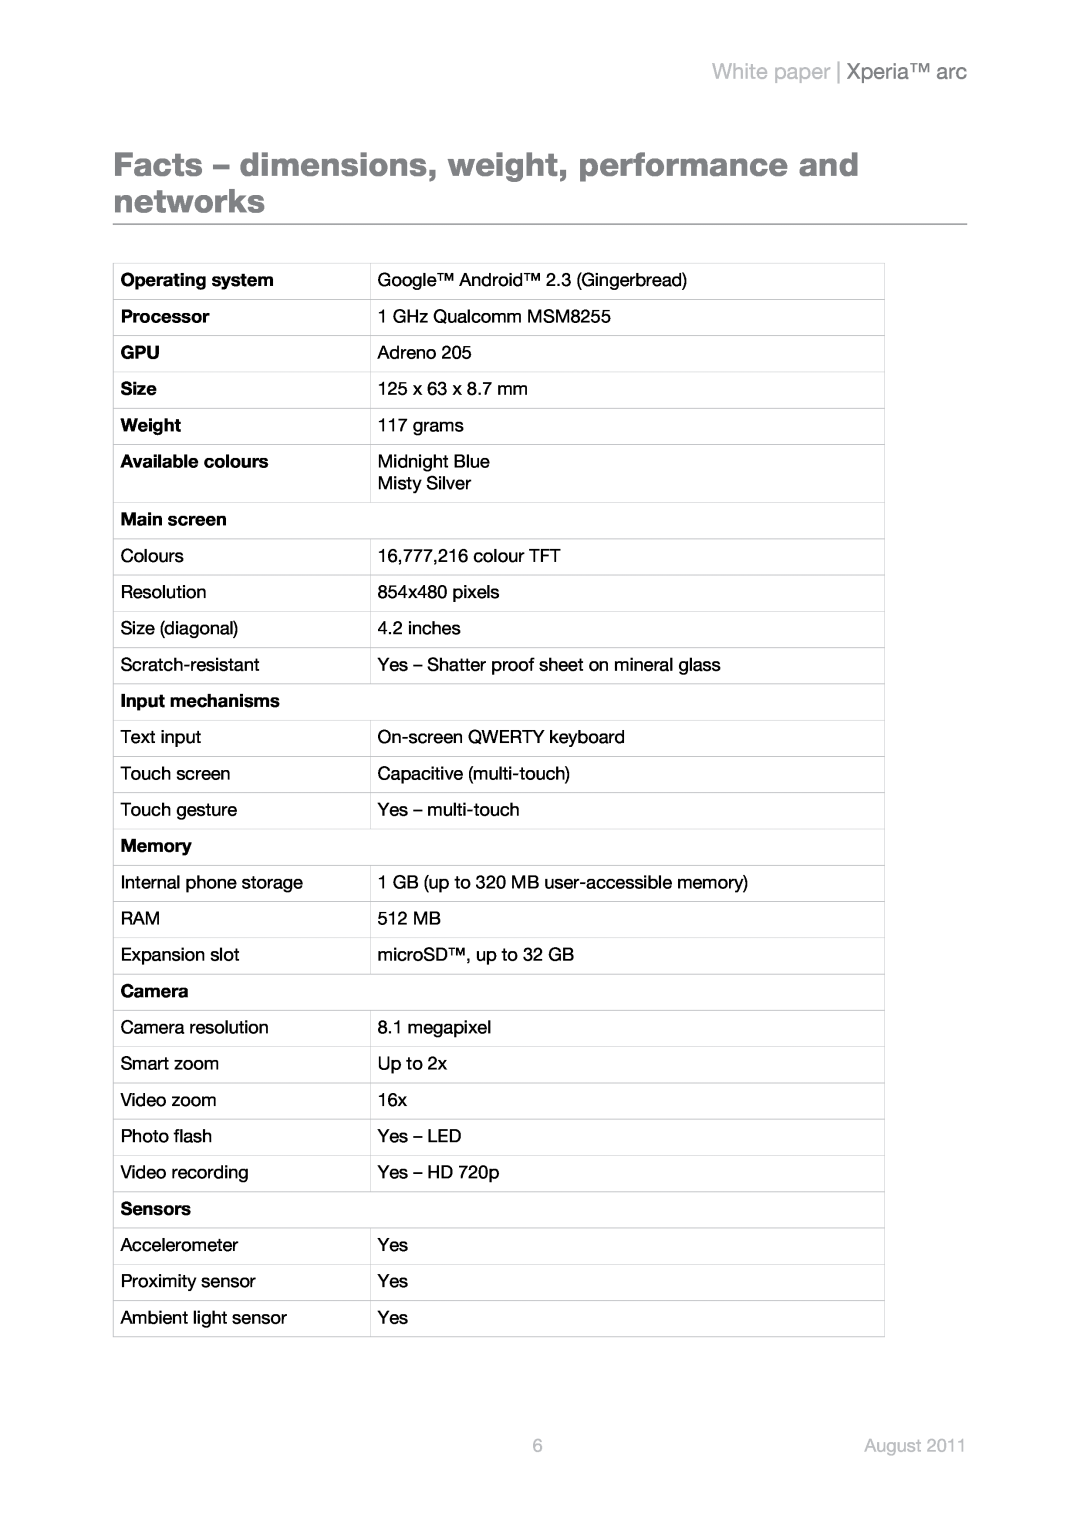 Sony Ericsson LT15a, LT15i manual Facts - dimensions, weight, performance and networks, White paper Xperia arc, August 